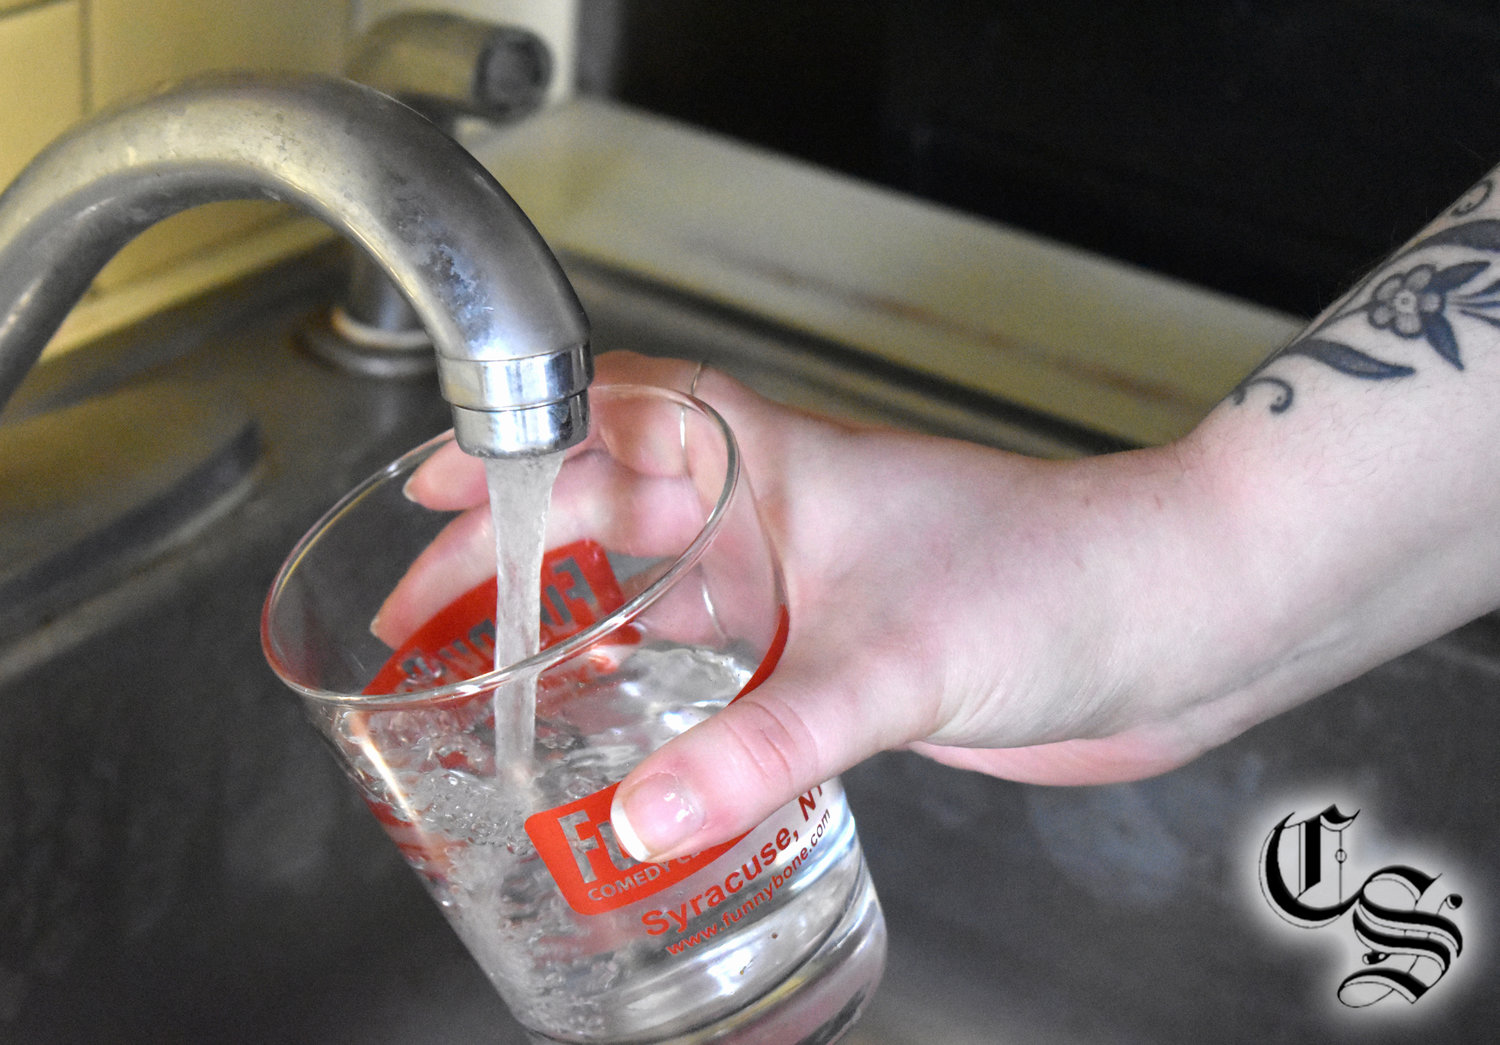 The Cortland County Health Department has begun a campaign to remind people to check their well water, as the weather warms and winter runoff could dump harmful bacteria into wells.